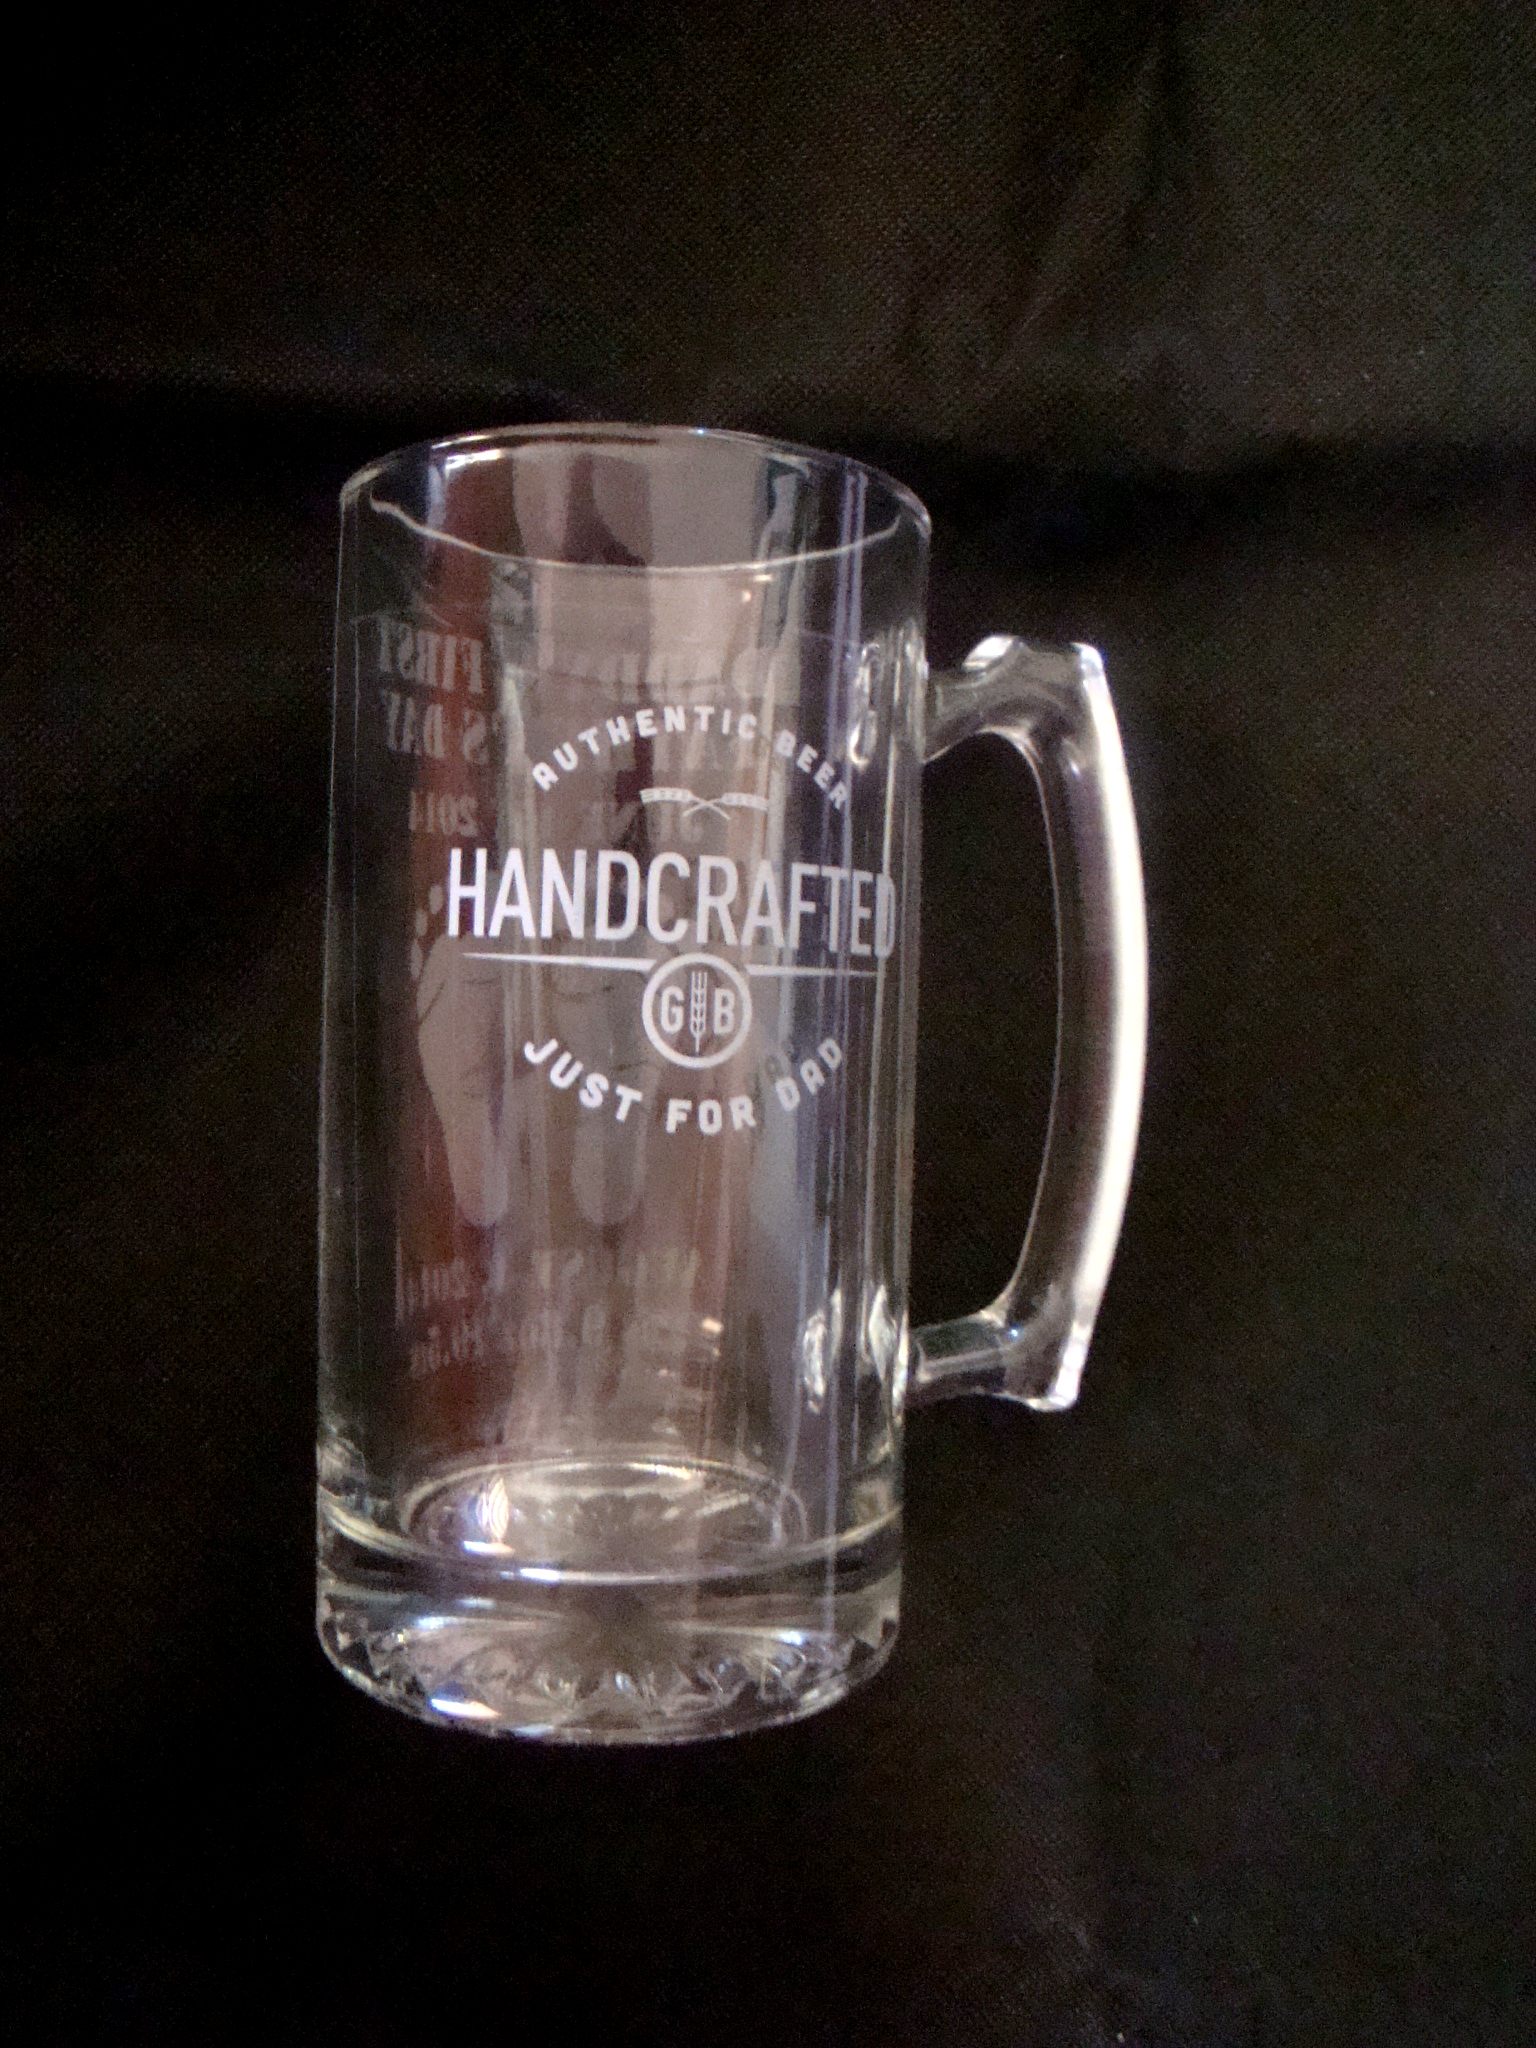 Handcrafted Just for Dad Mug